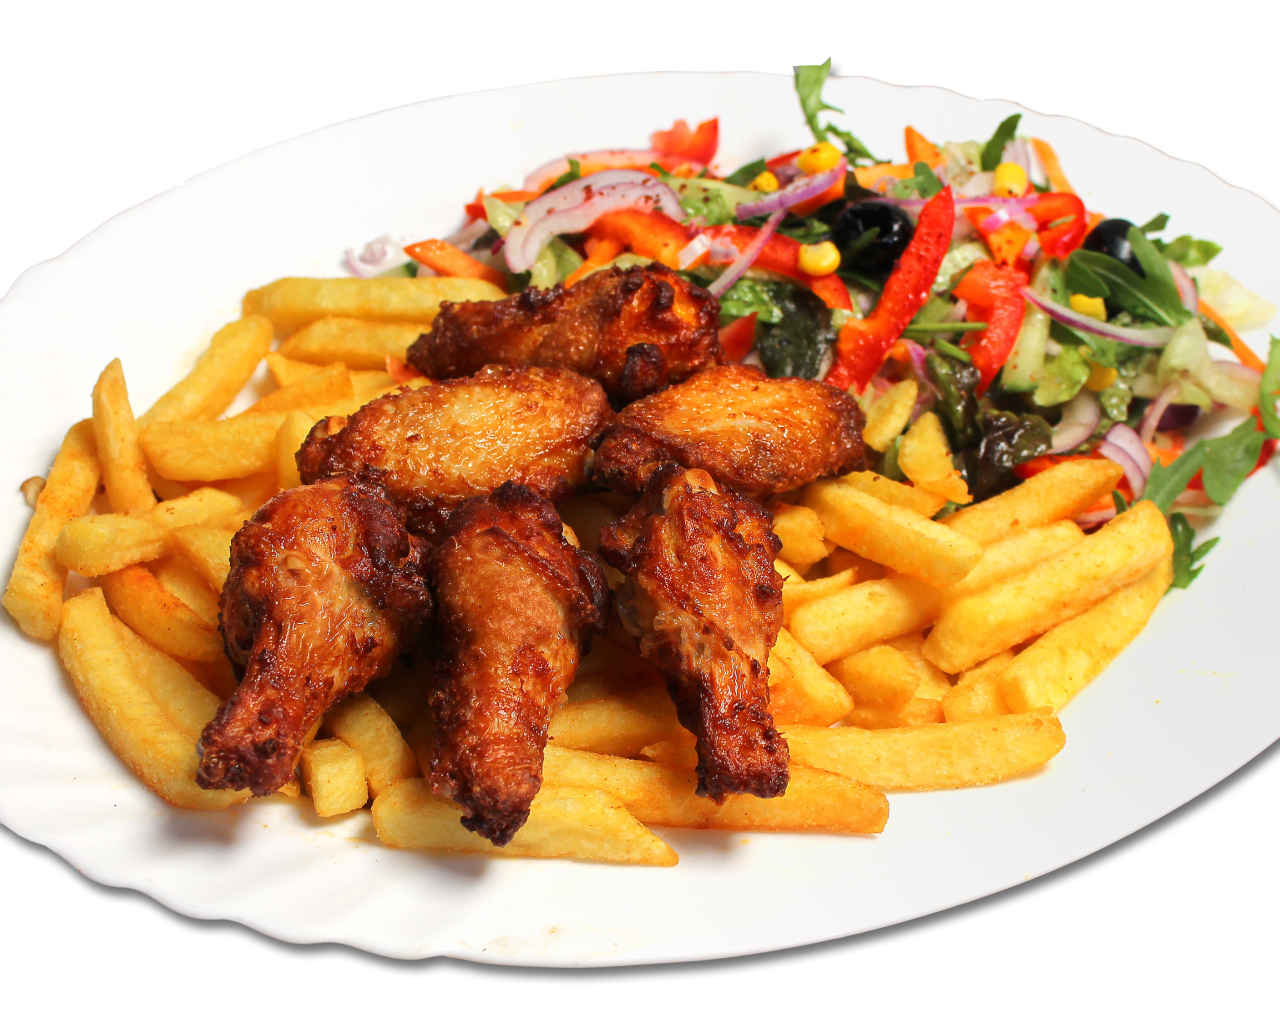 French fries with fried chicken and salad on a white plate